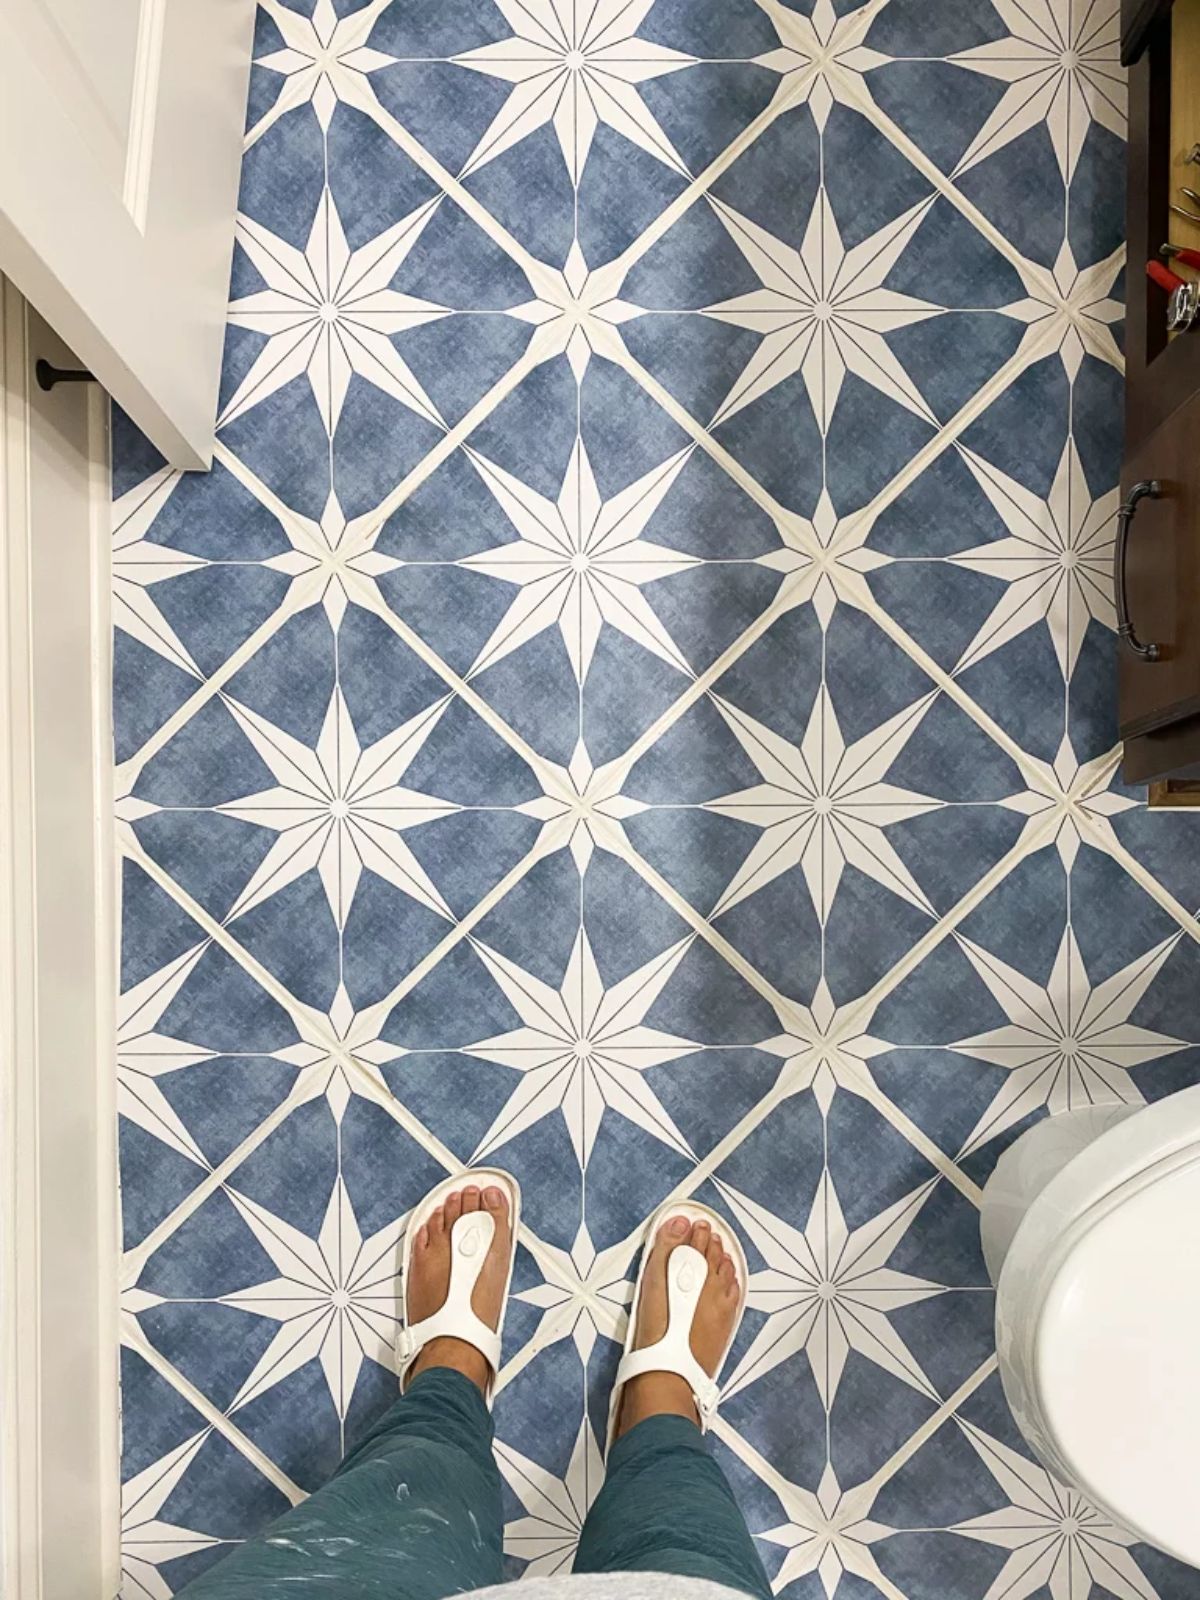 Upgraded Bathroom Tiles Without Replacing It